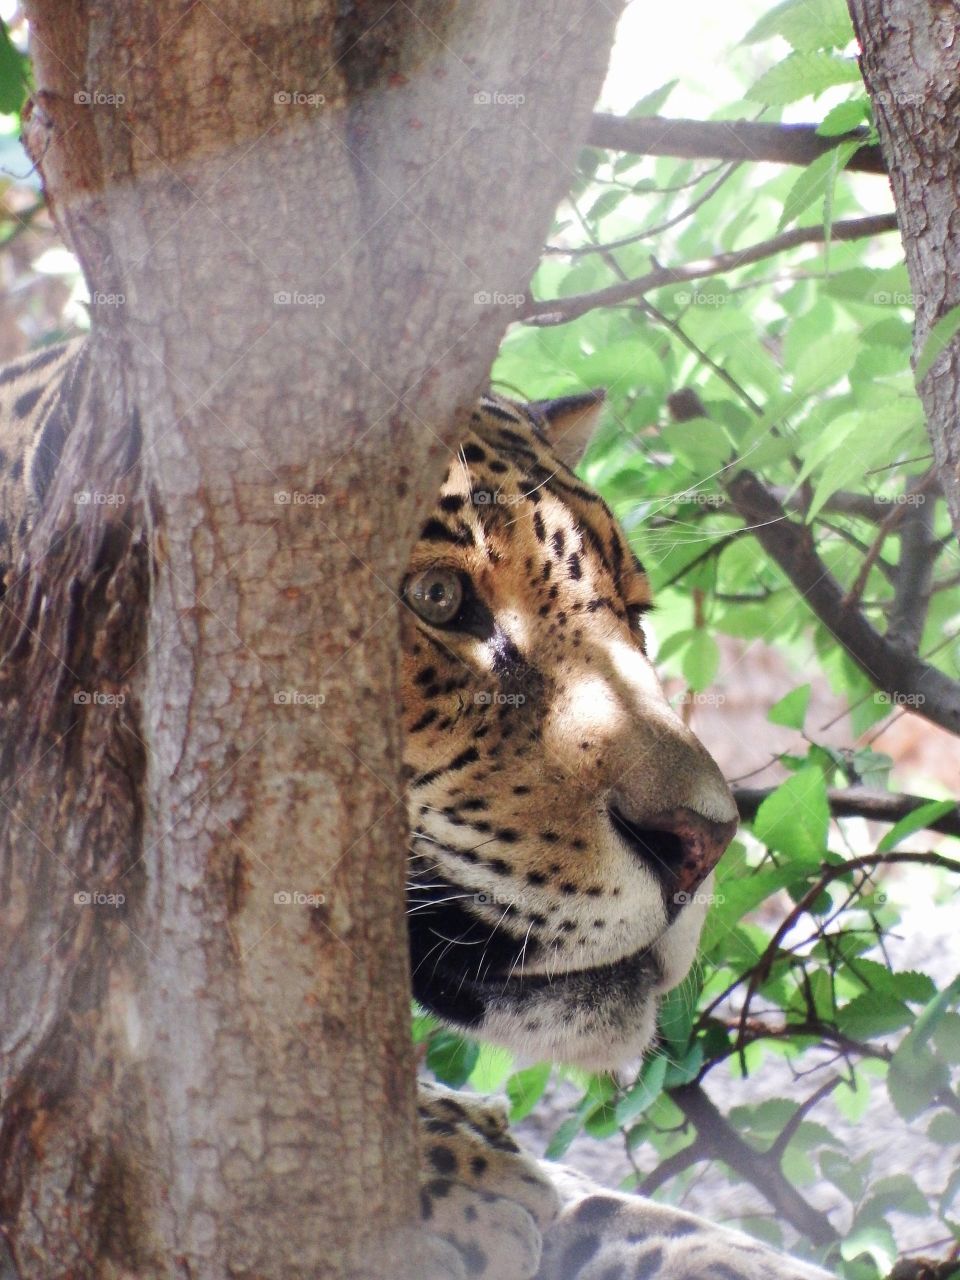 Leopard face peeking out from behind a tree.